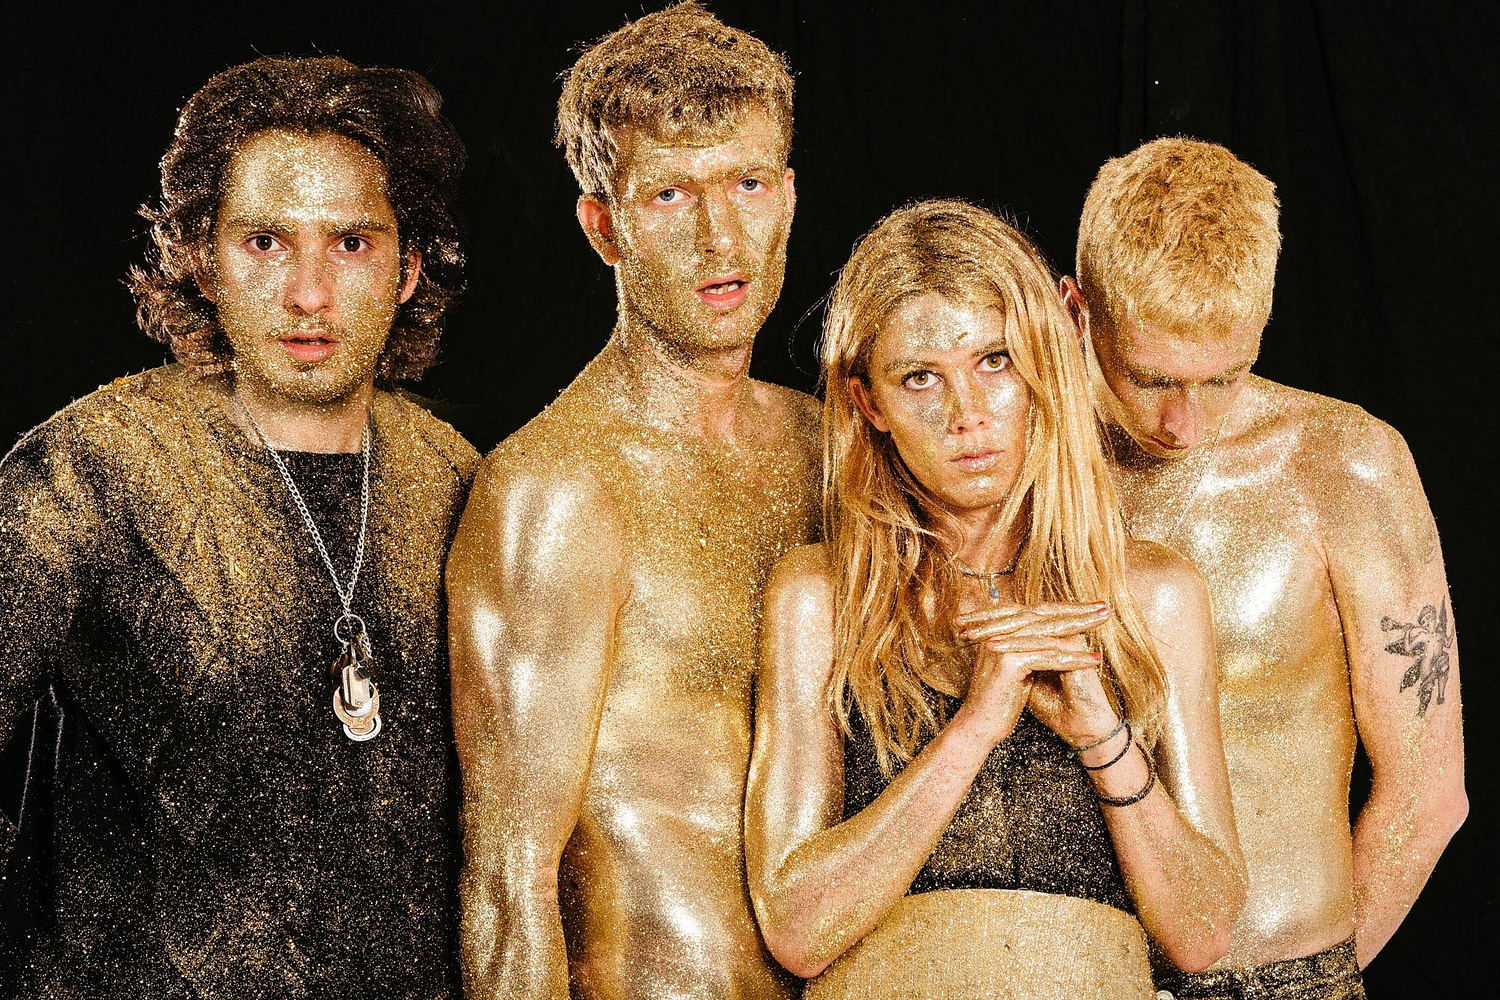 New issue of DIY out now, feat. Wolf Alice, Tame Impala, Savages & more